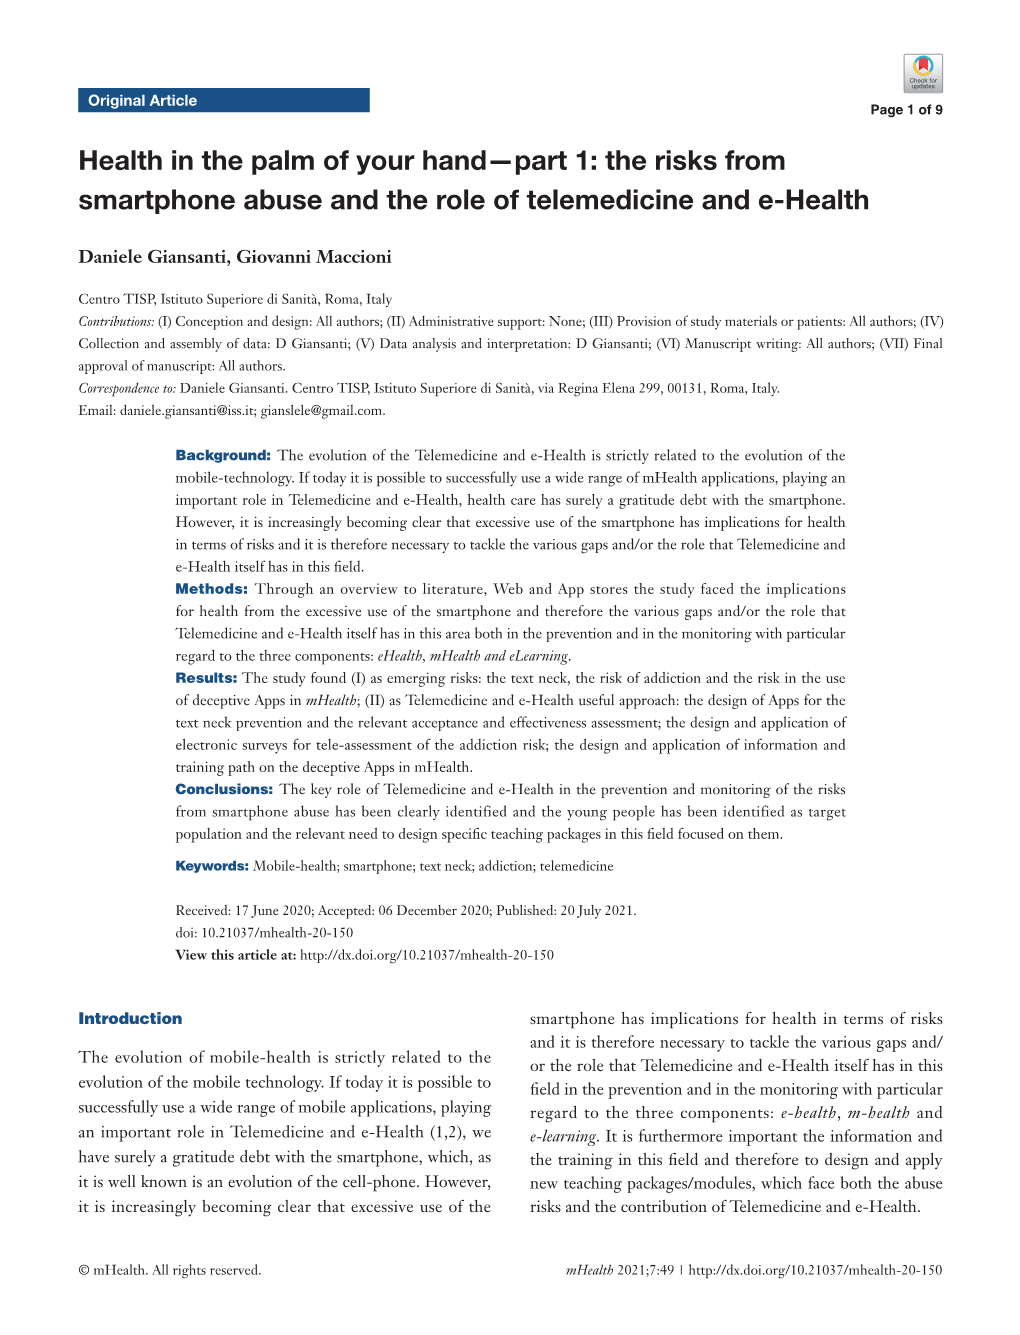 The Risks from Smartphone Abuse and the Role of Telemedicine and E-Health